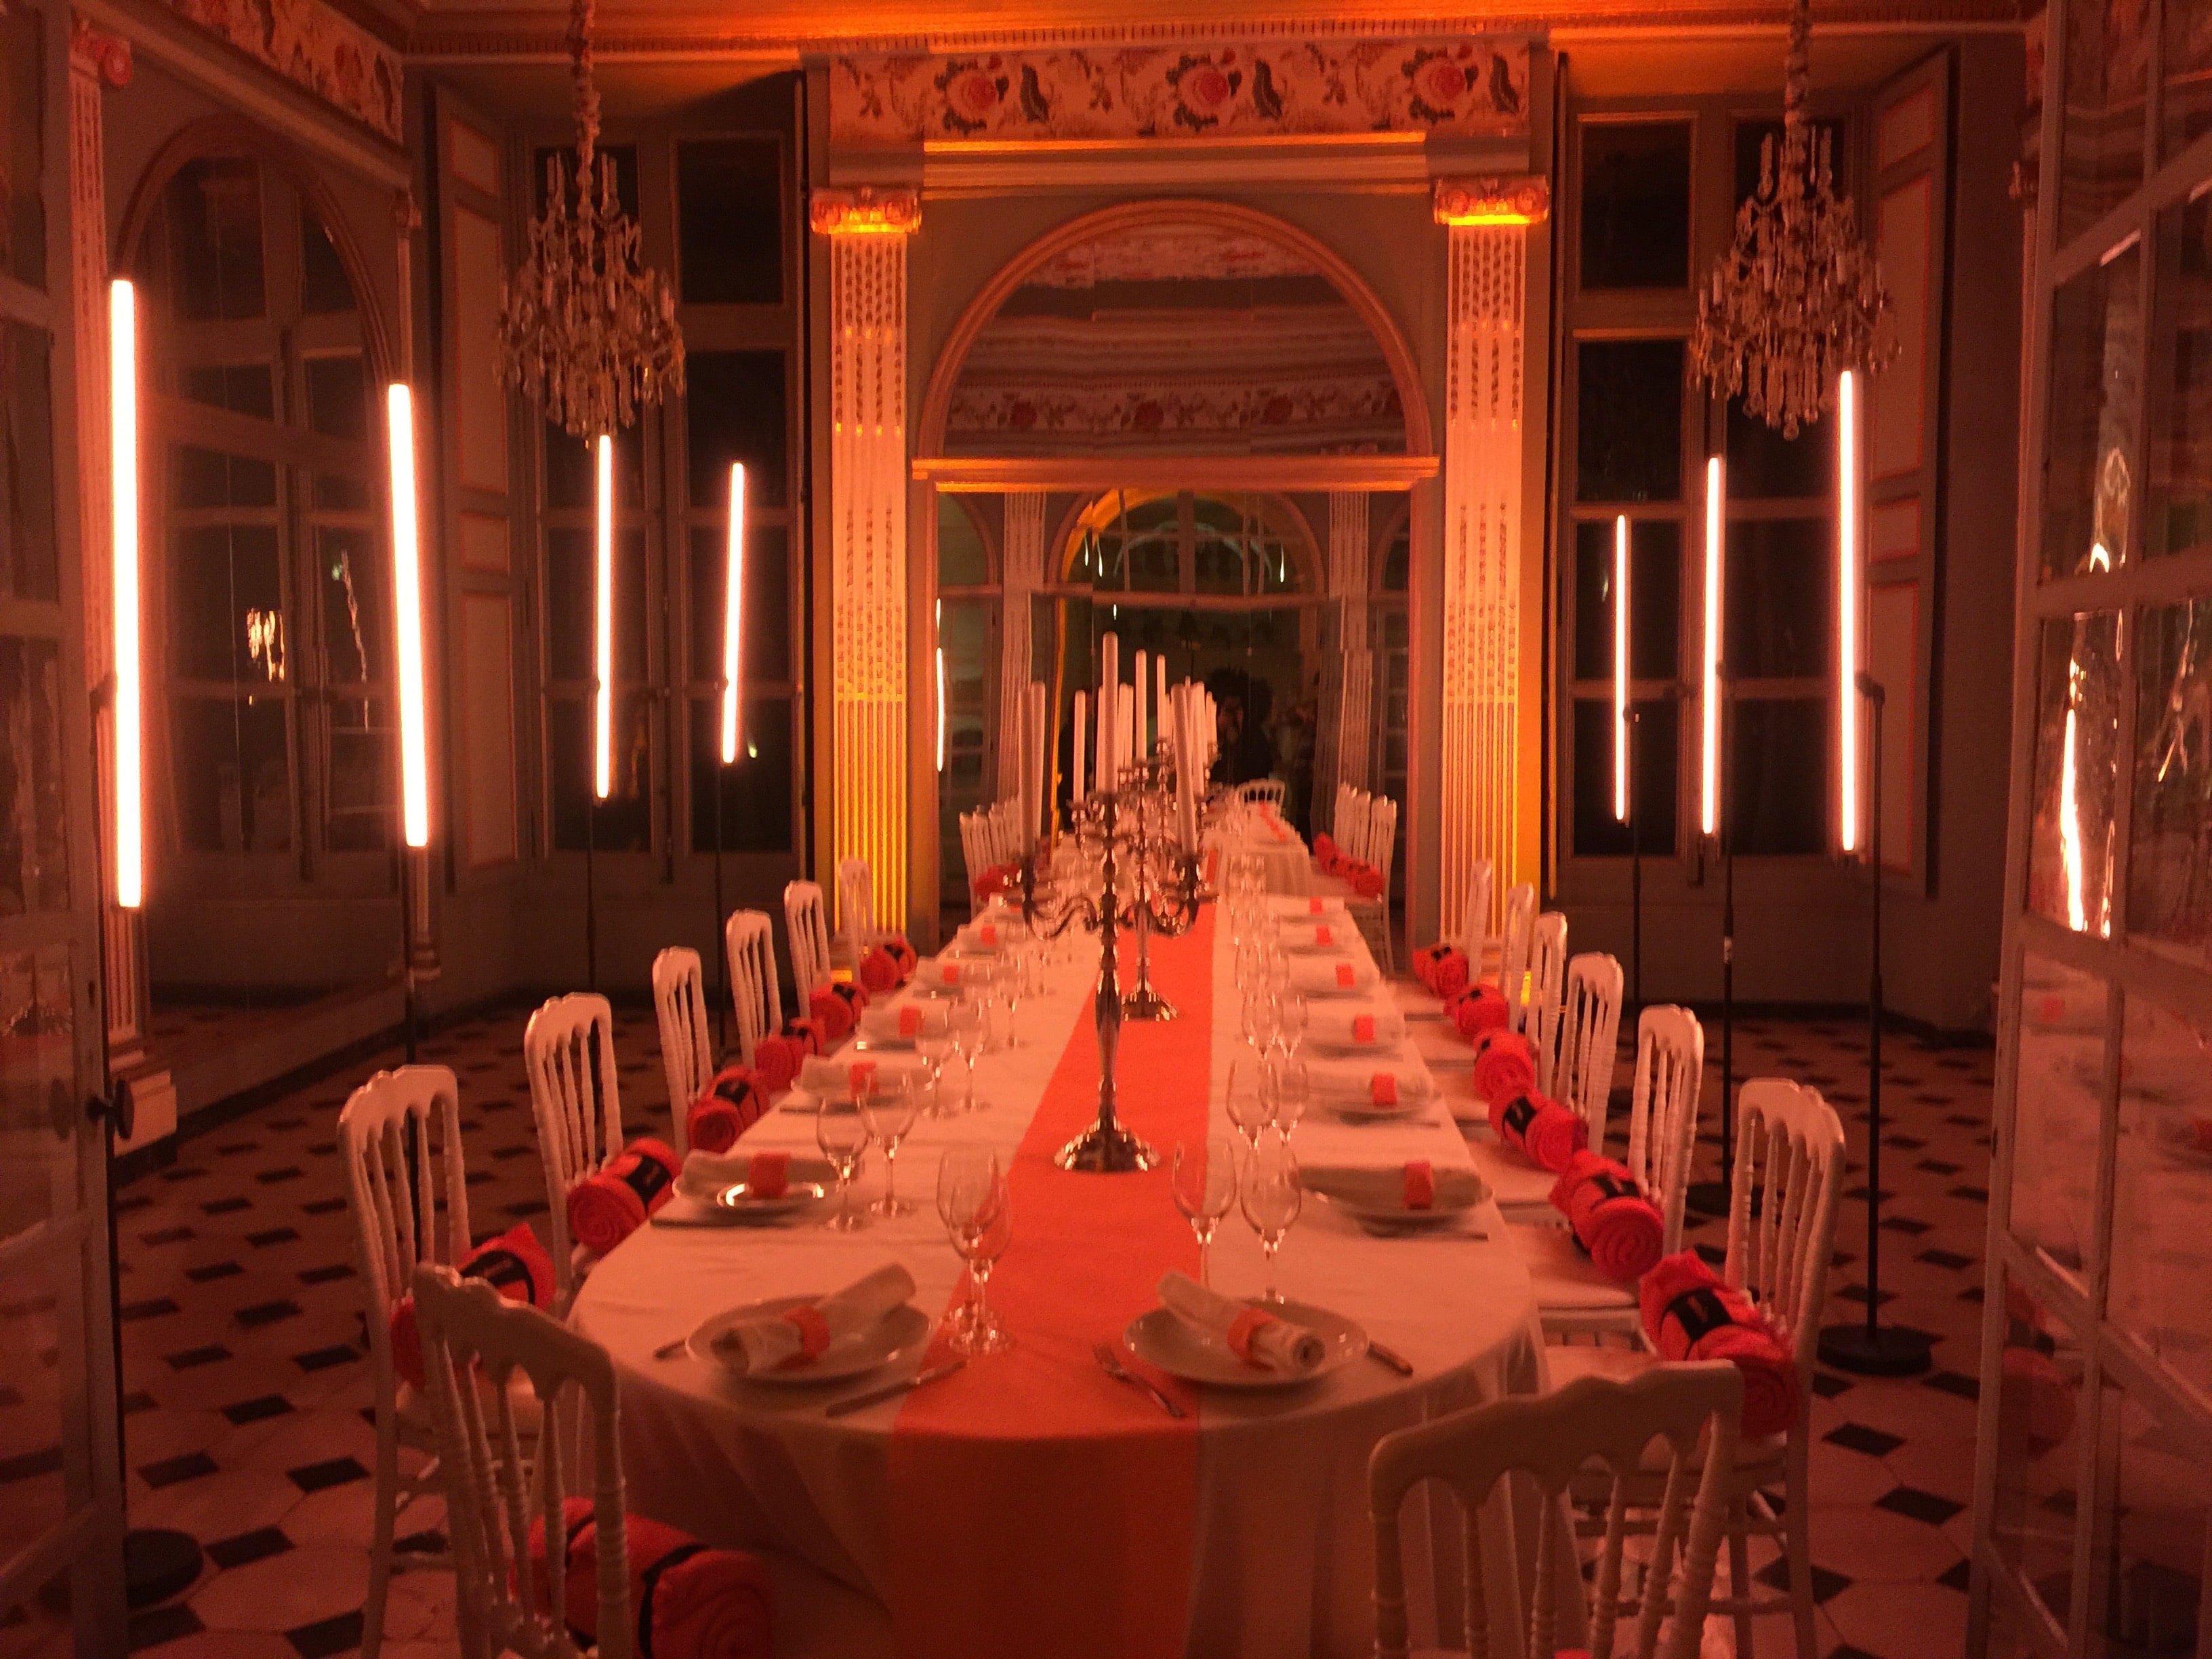 diner leboncoin wato we are the oracle evenementiel soiree rennes chateau boschet table miroir ax1